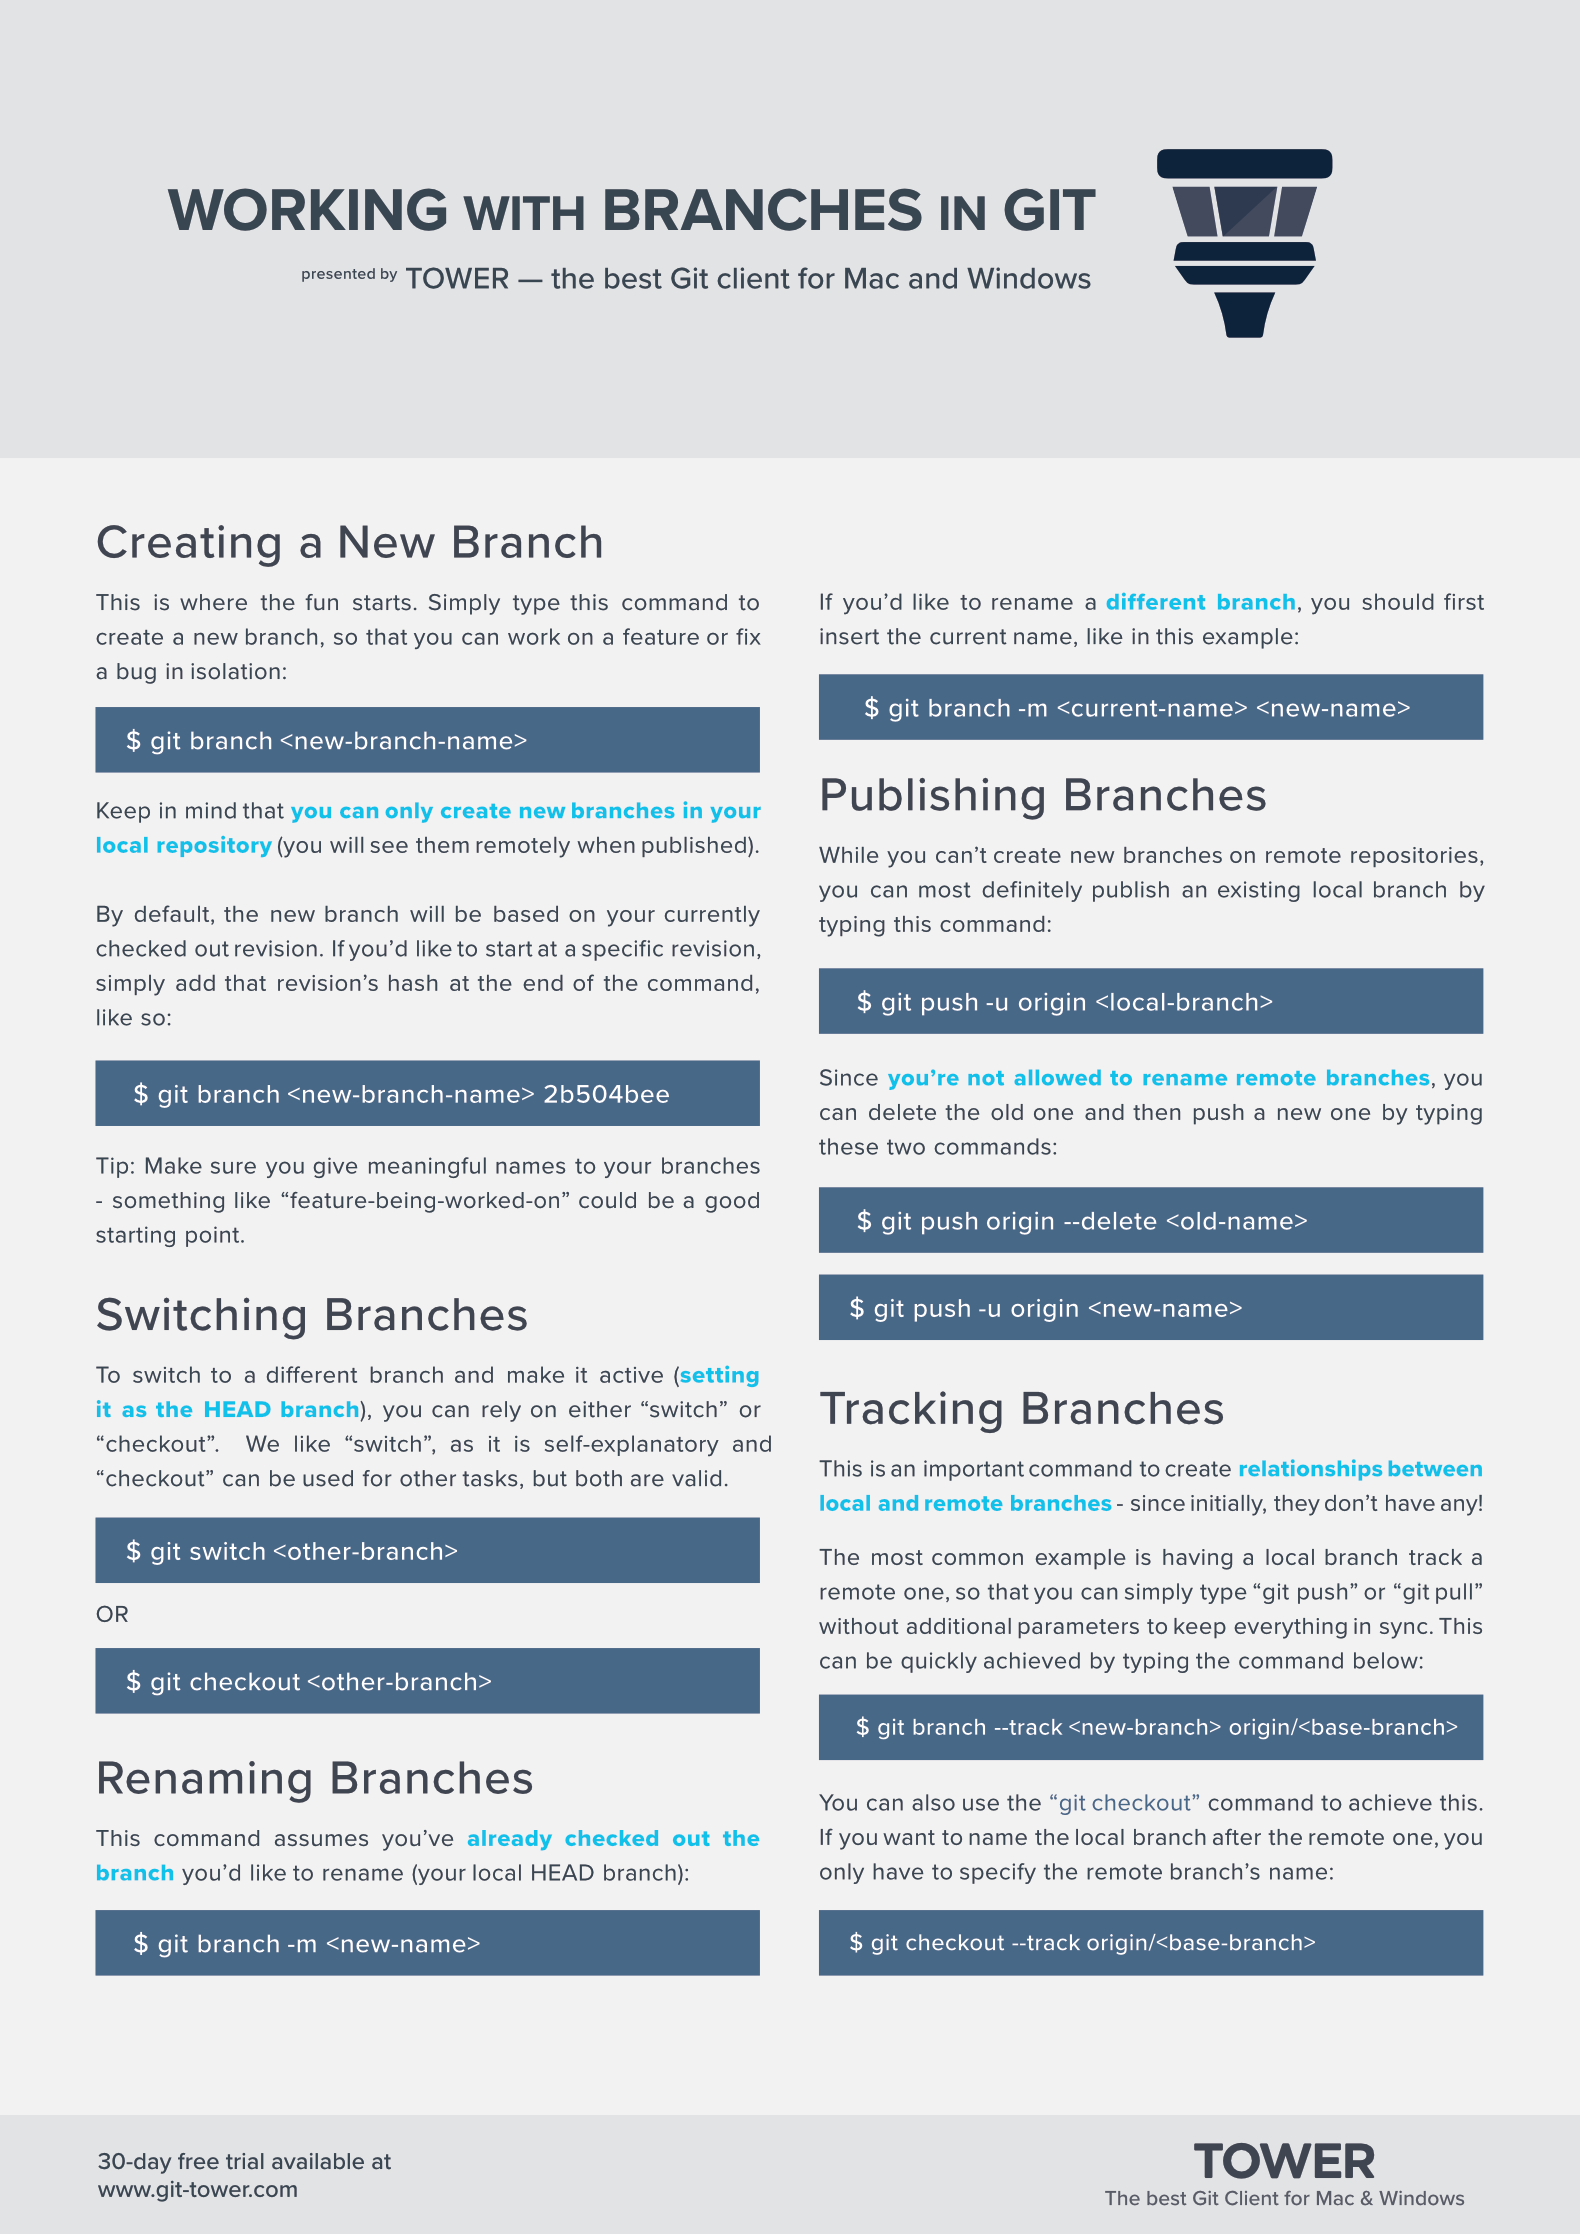 Working with Branches in Git Cheat Sheet (Page 1)